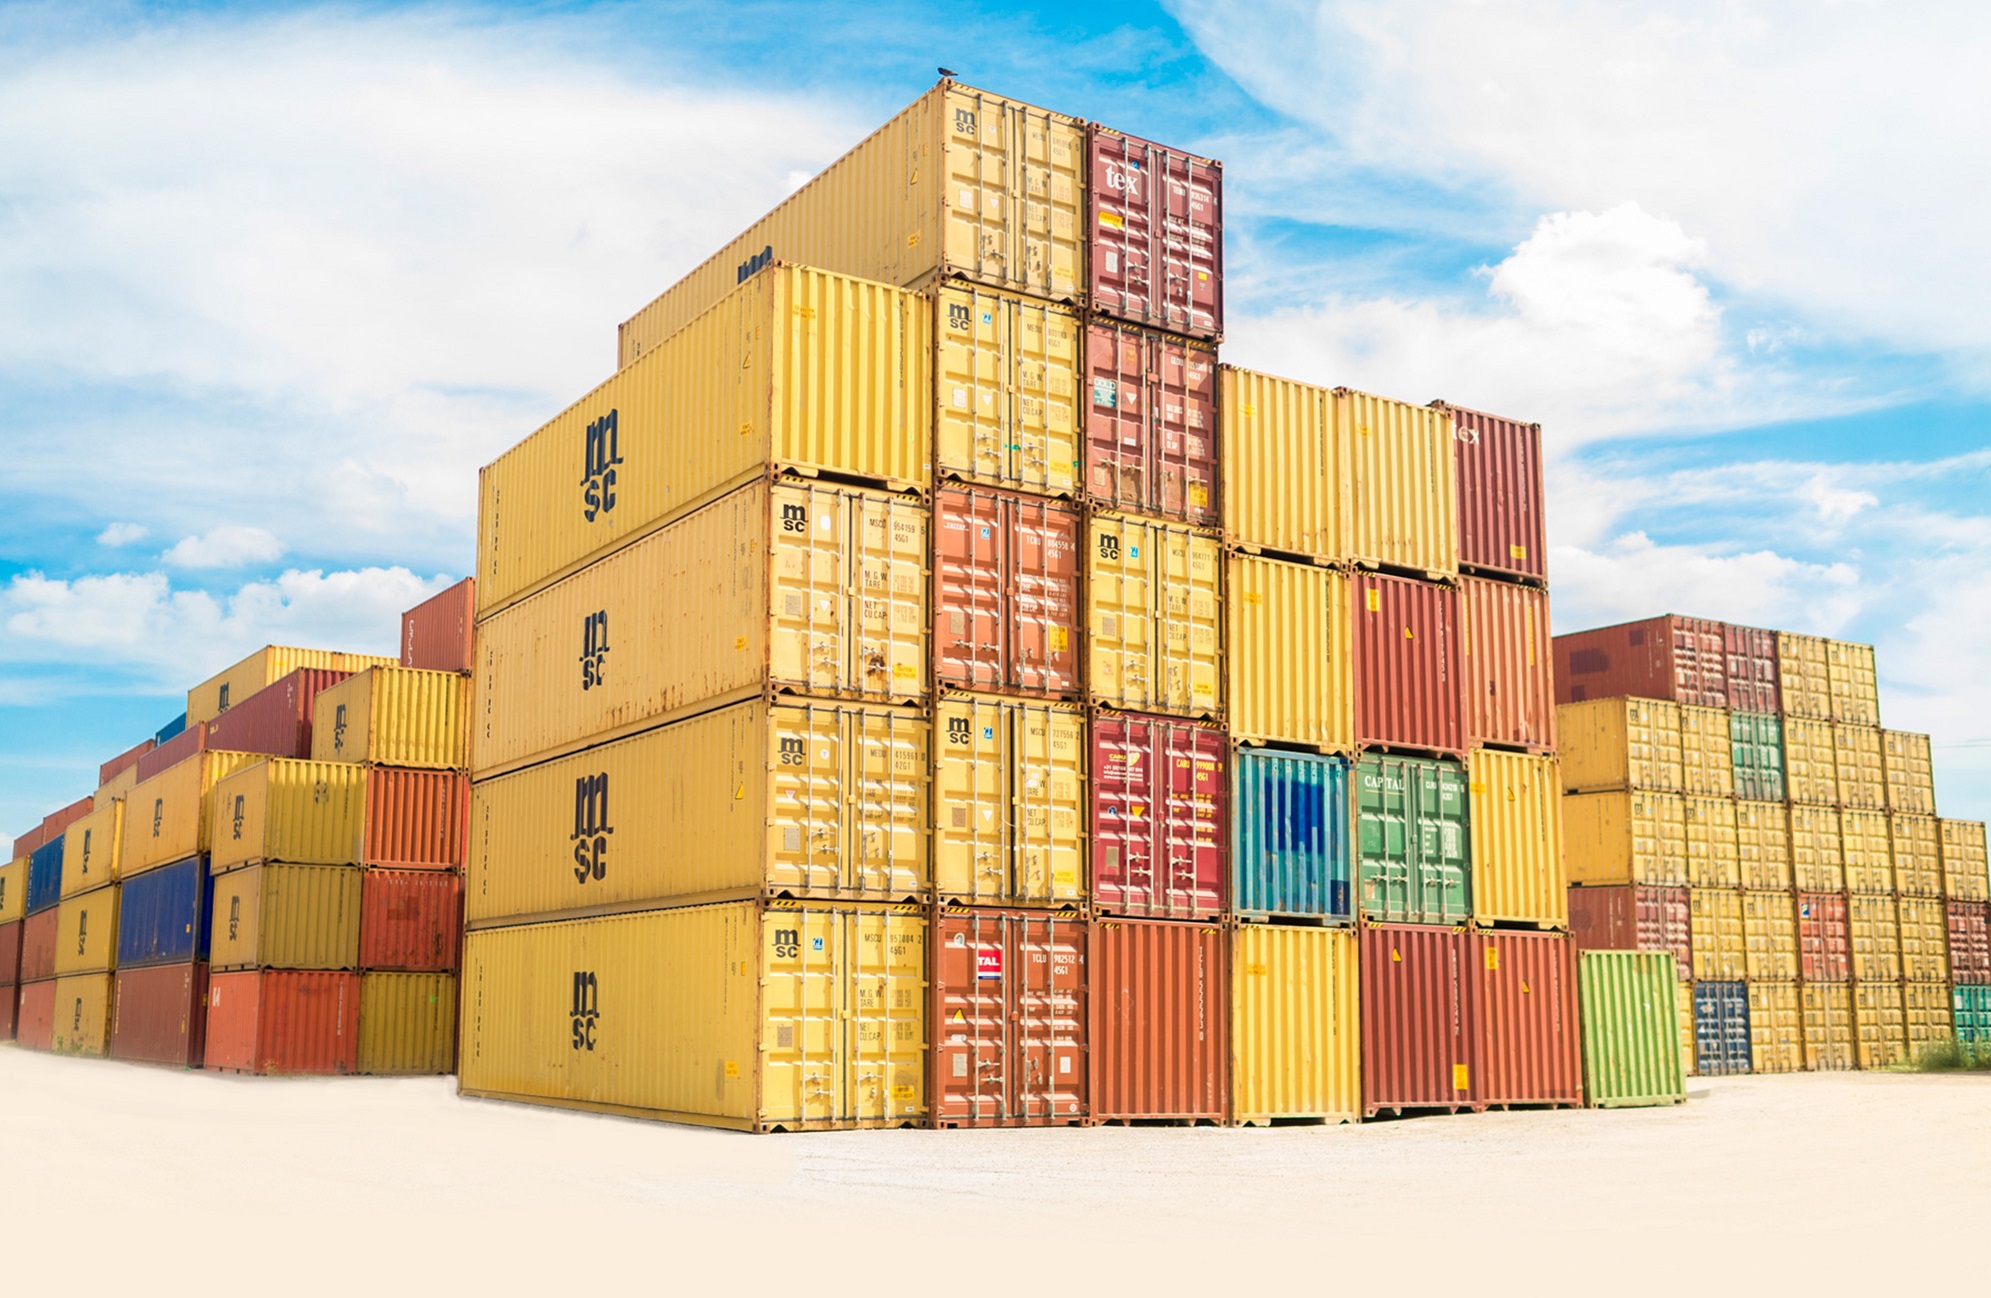 Container image by Frank Mckenna for Unsplash.com